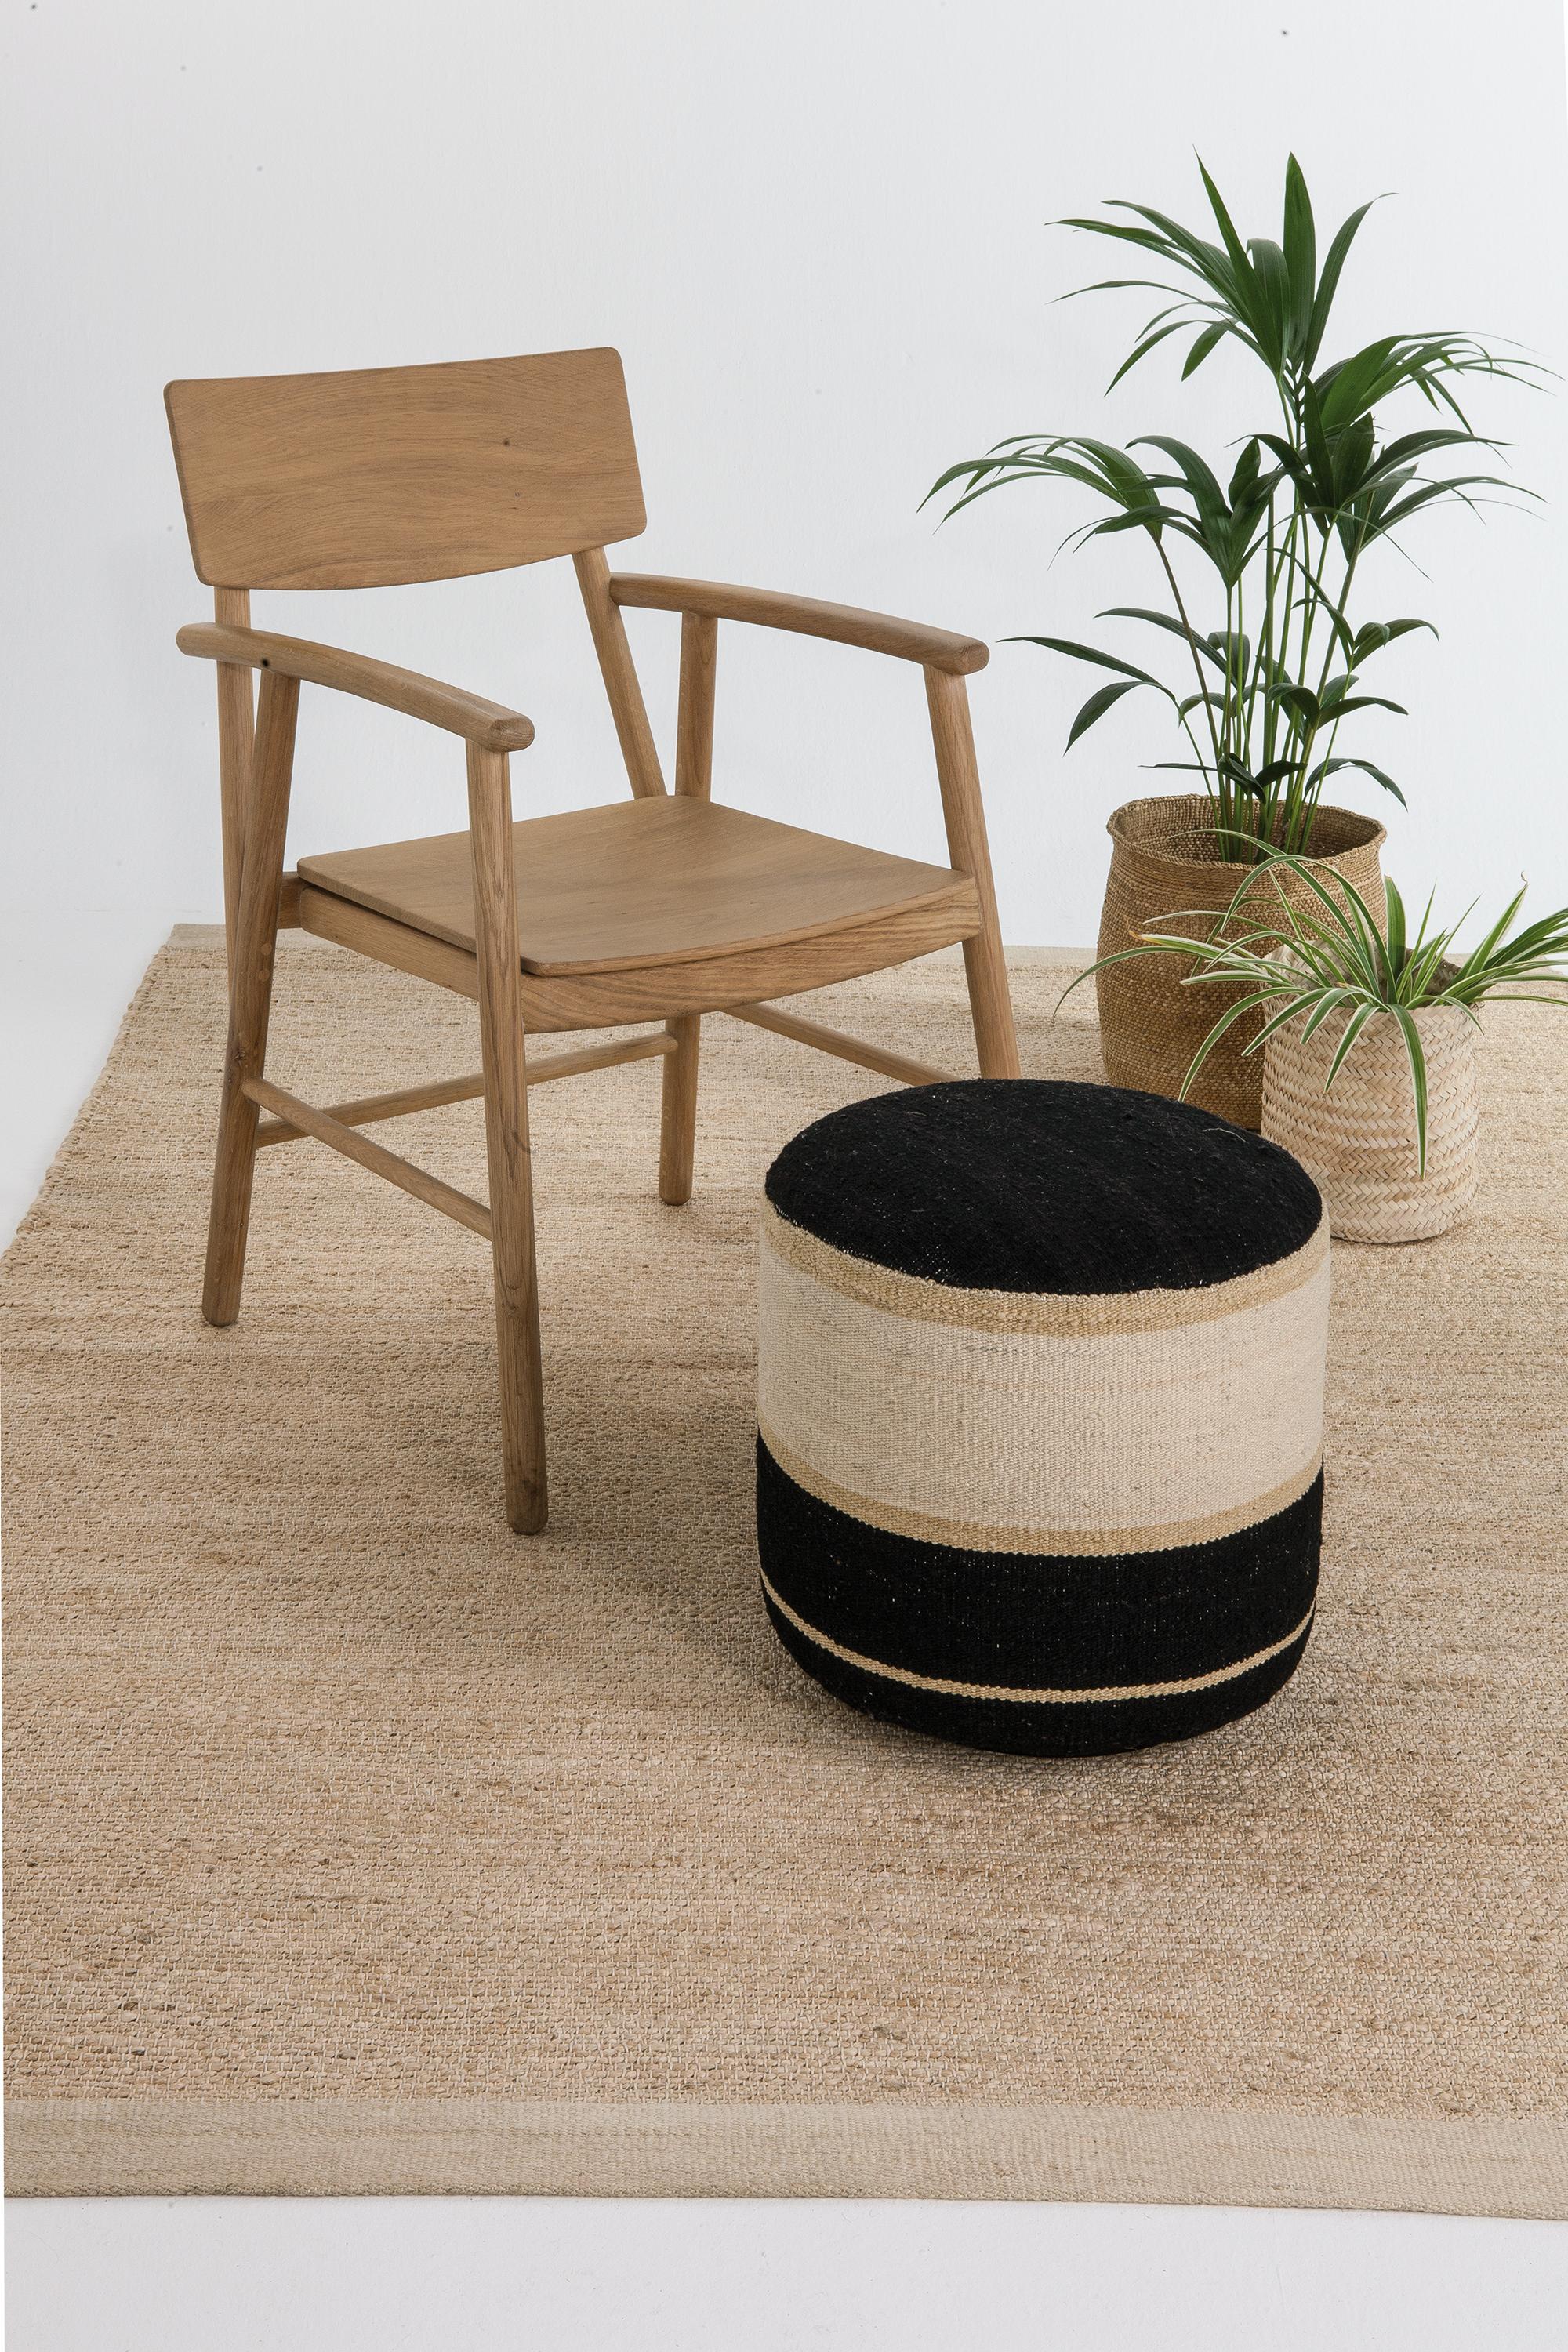 'Kilim 1' Pouf by Nani Marquina and Marcos Catalán for Nanimarquina.

Executed in 100% hand-spun Afghan wool with a birch base and flame-retardant filling, this decorative accessory is the perfect way to add a touch of color to any room in the